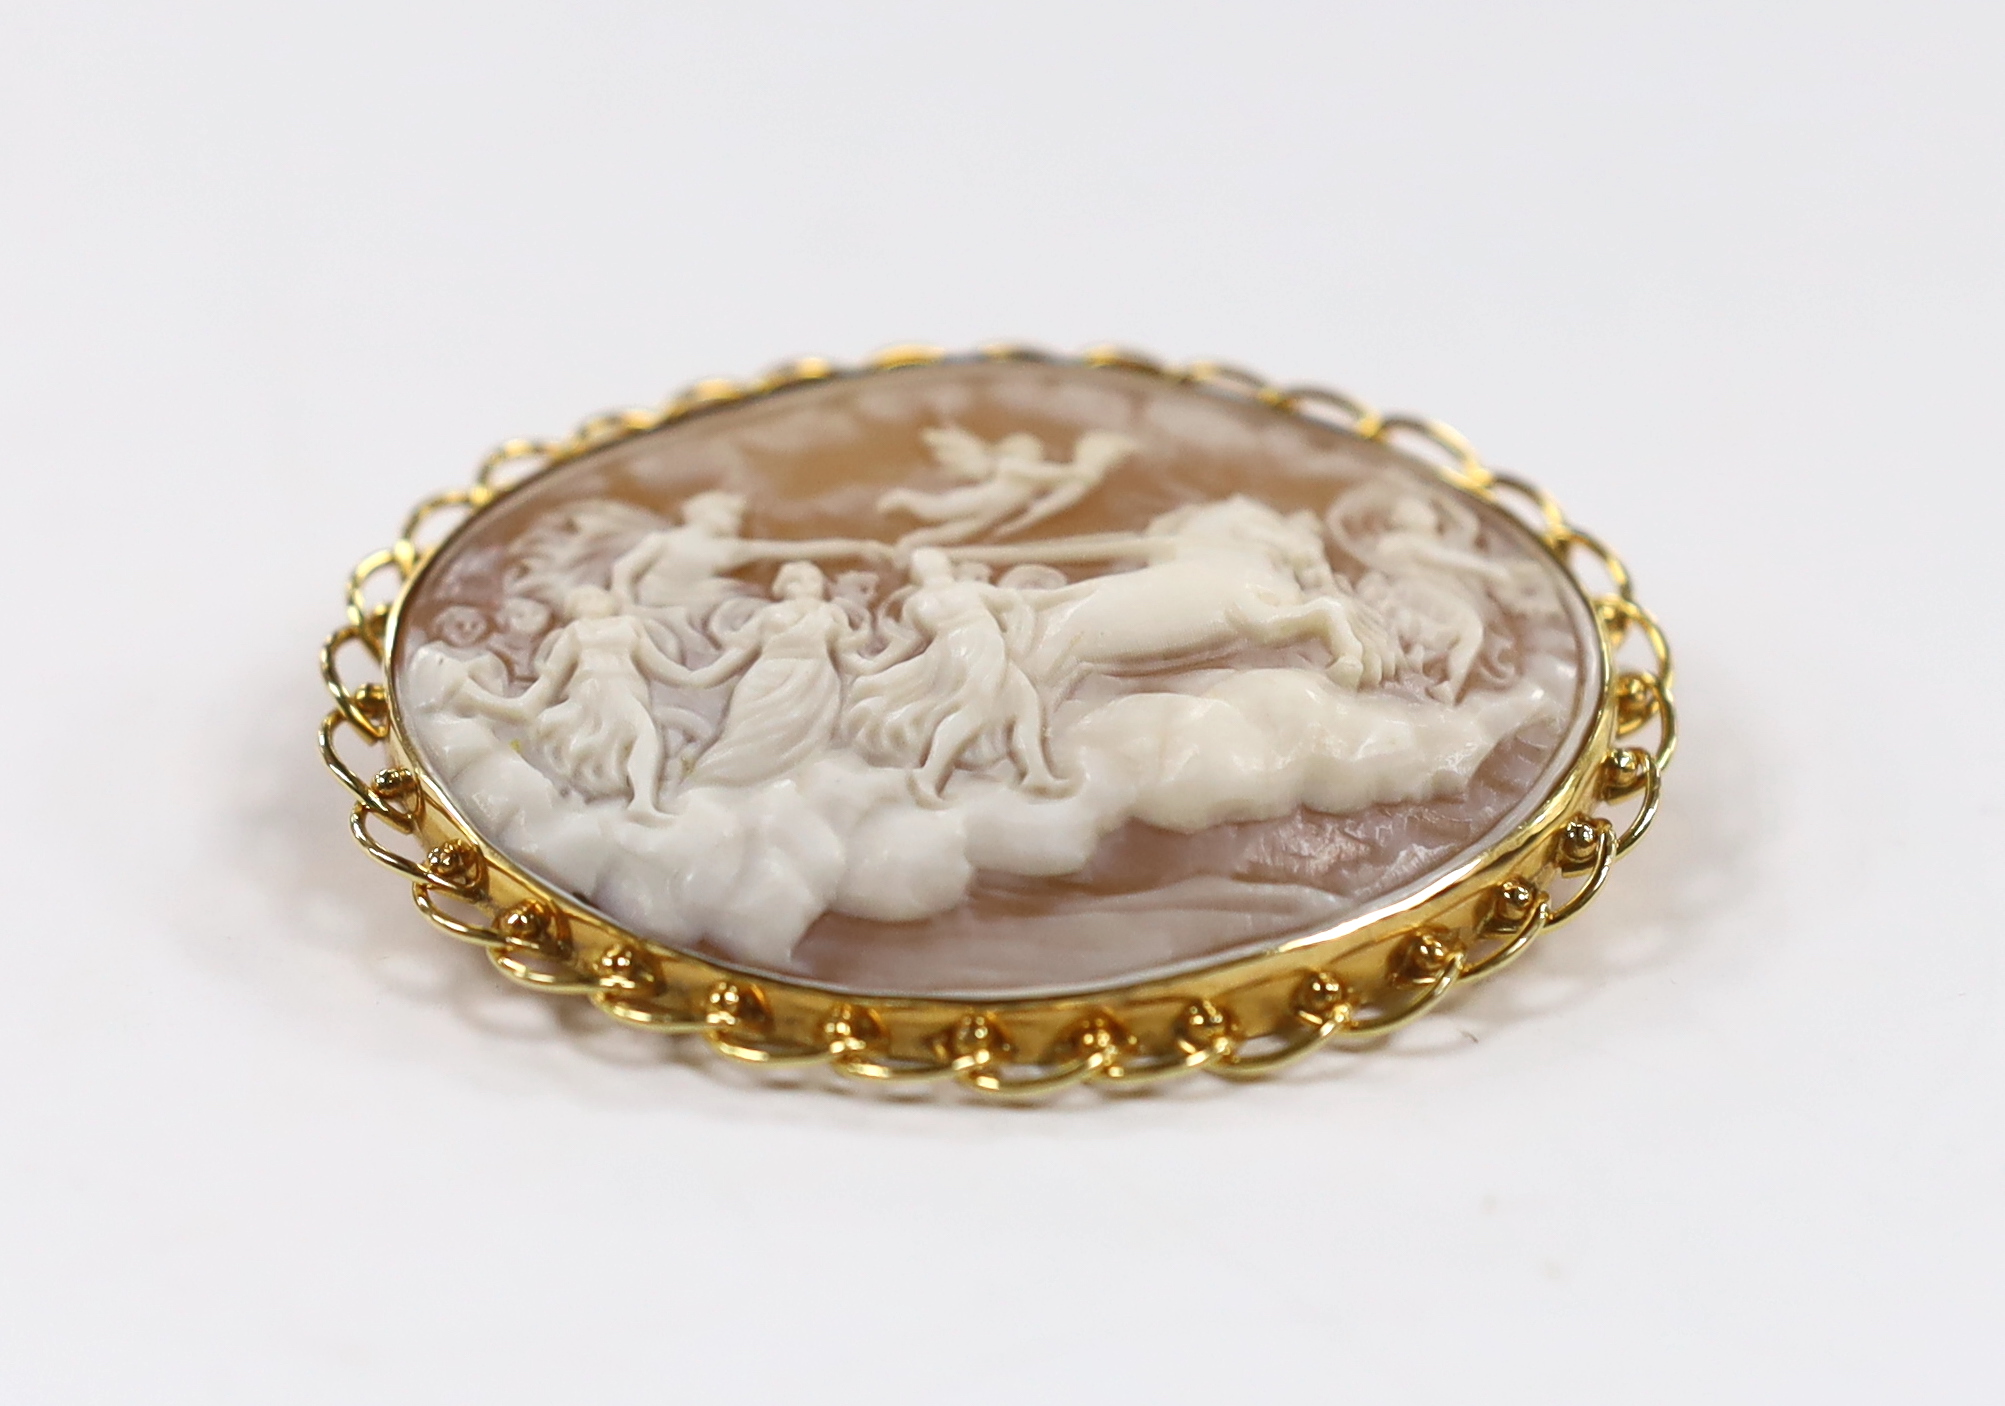 A modern 18k mounted oval cameo shell pendant brooch, carved with Phoebus and the hours preceded by Aurora, 58mm, gross weight 16 grams.